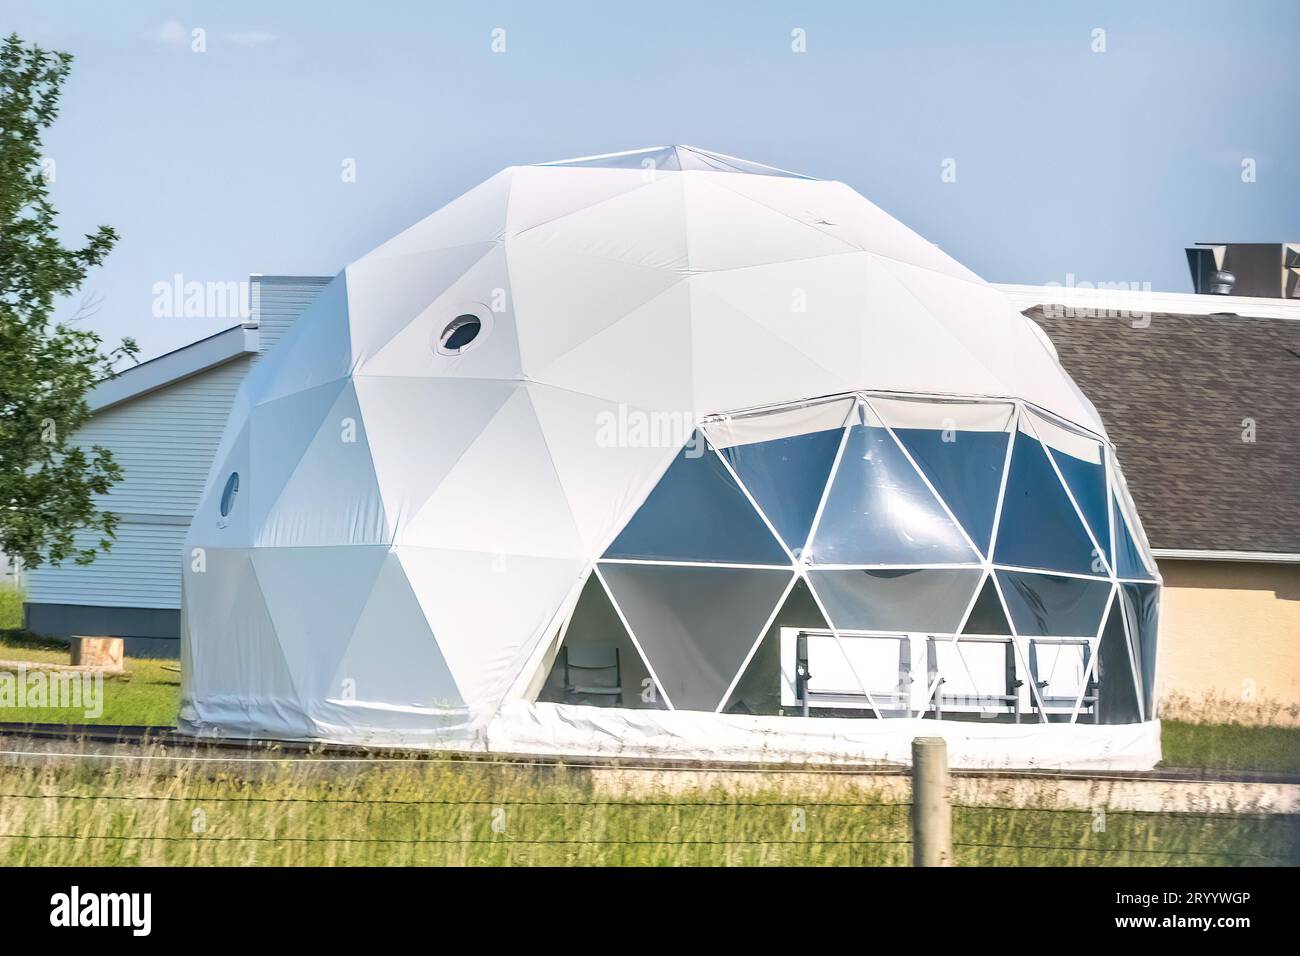 A Bubble Tent Dome House Camping Tent or a Geodome outdoor classroom for co-curricular classes and clubs. Stock Photo